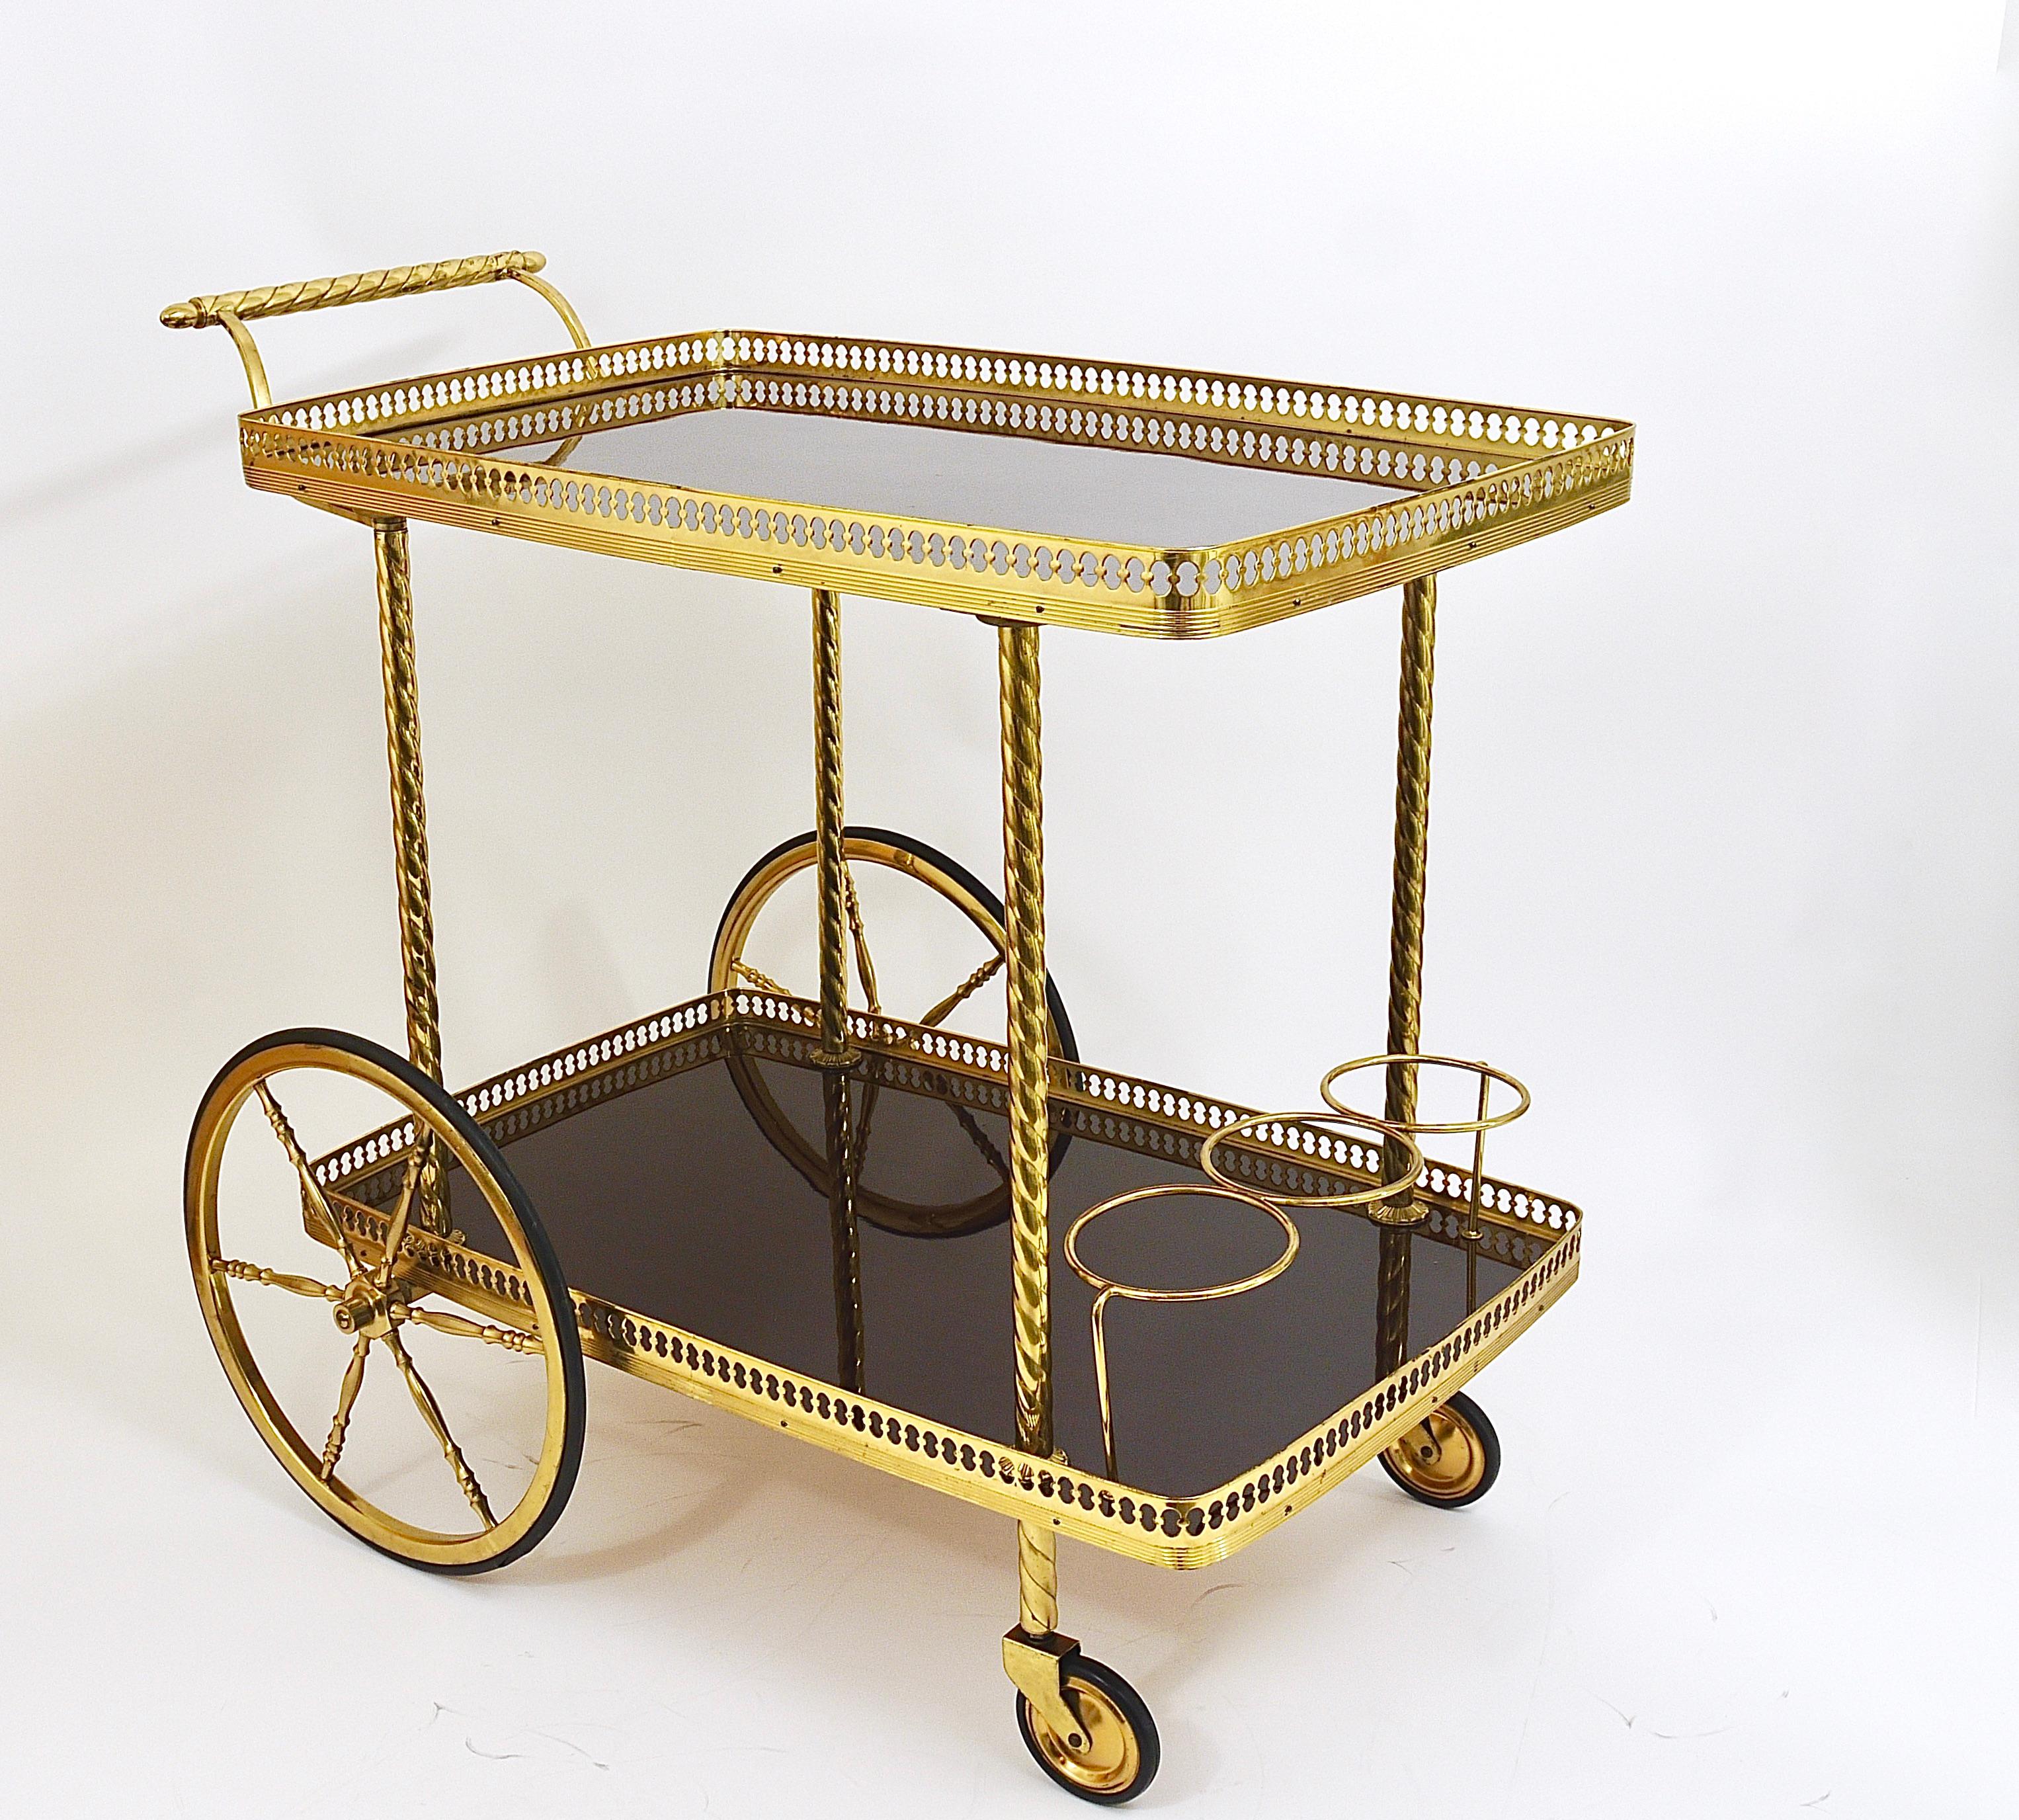 An exquisite and elegant French Hollywood Regency brass bar cart/ drinks serving trolley from the 1950s. A beautiful Midcentury piece of furniture with two glossy mahogany plateaus, decorated by pierced brass galleries. Standing on four lovely